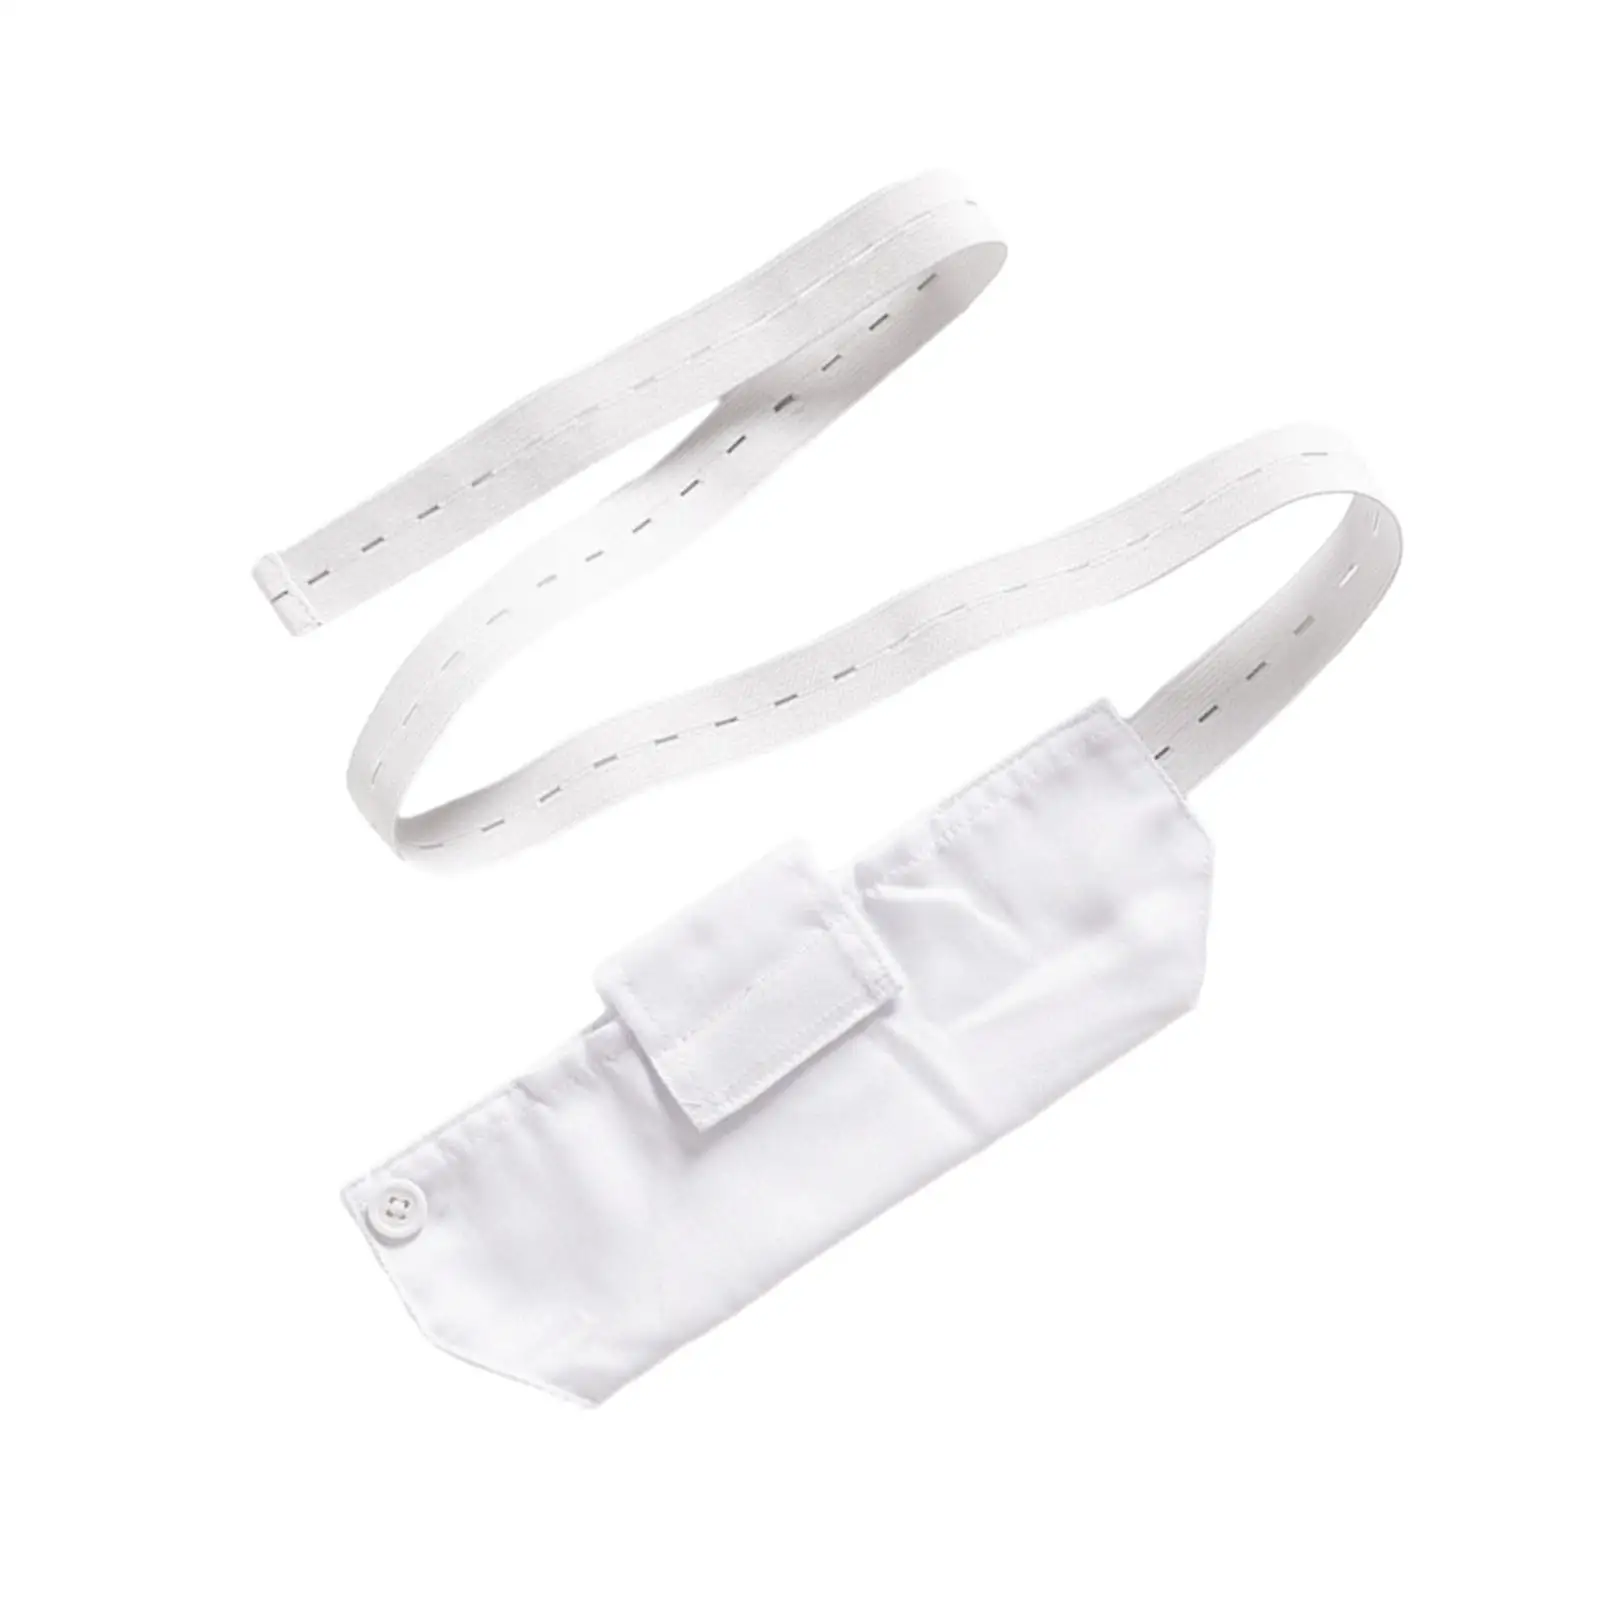 Peritoneal Dialysis Tube Belt Soft Comfortable for Men Women Peritoneal Tube Belt Feeding Tube Belt Protection Belt with Bag